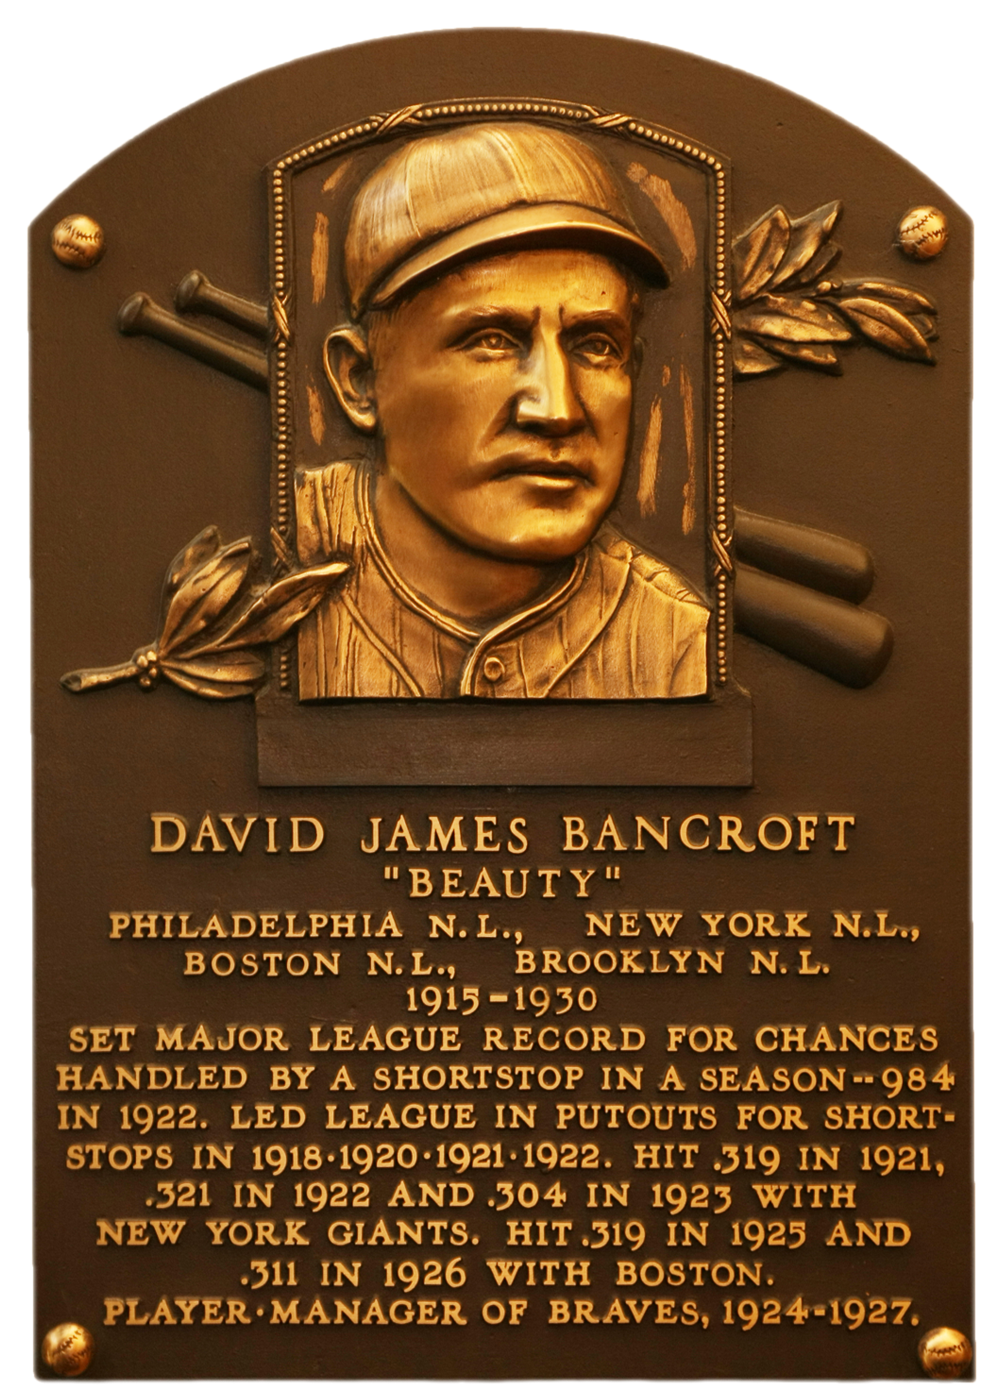 Dave Bancroft Hall of Fame plaque